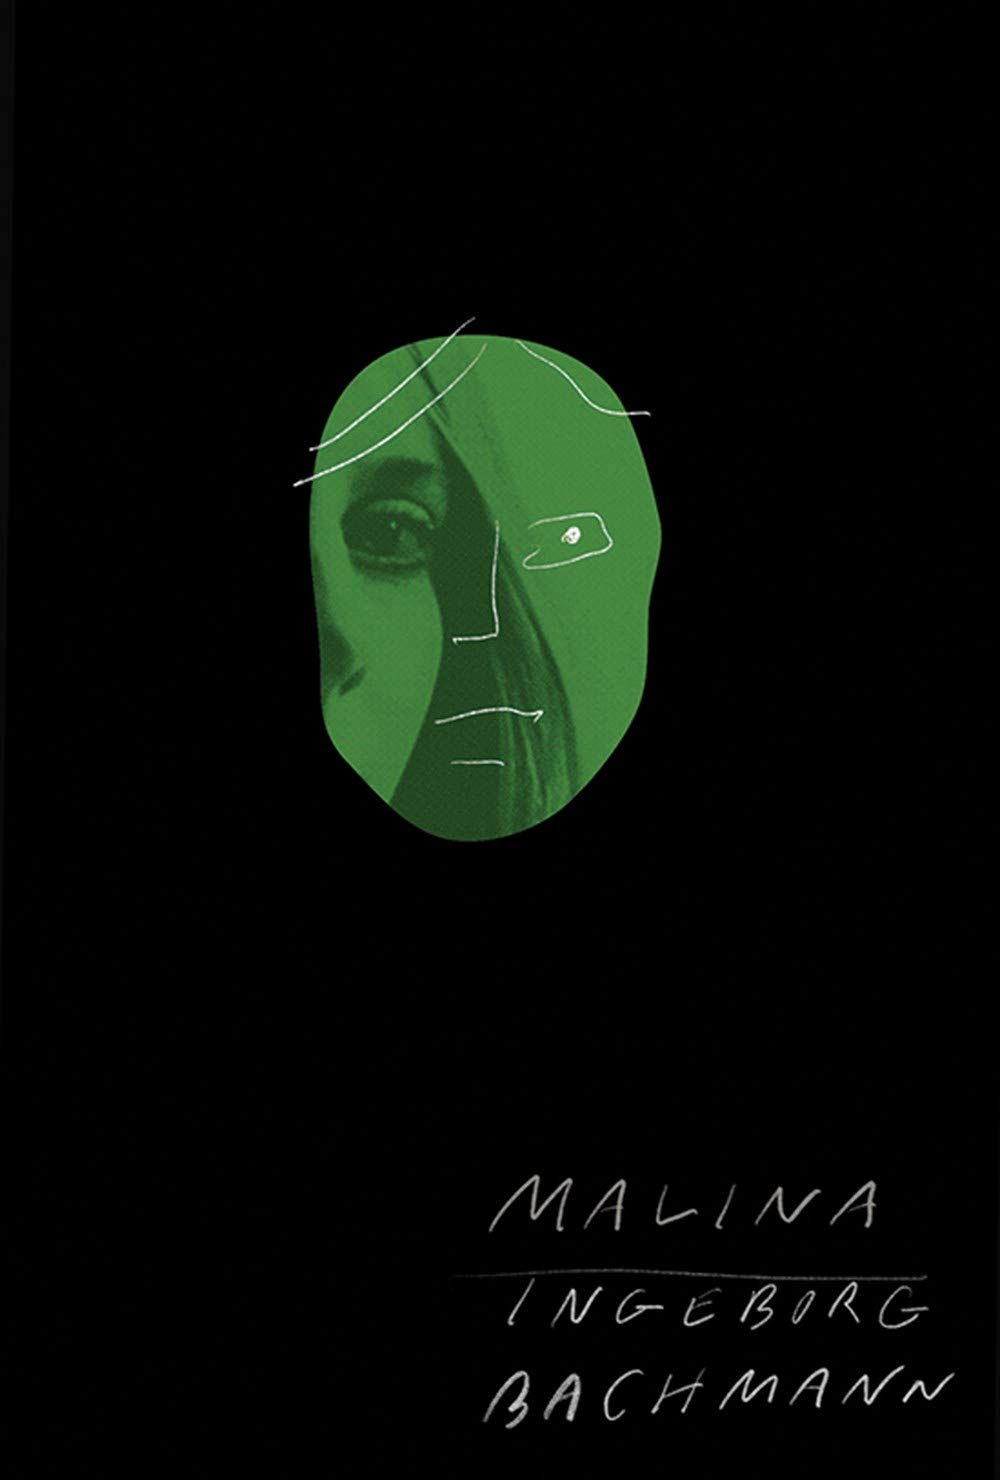 The cover of Malina